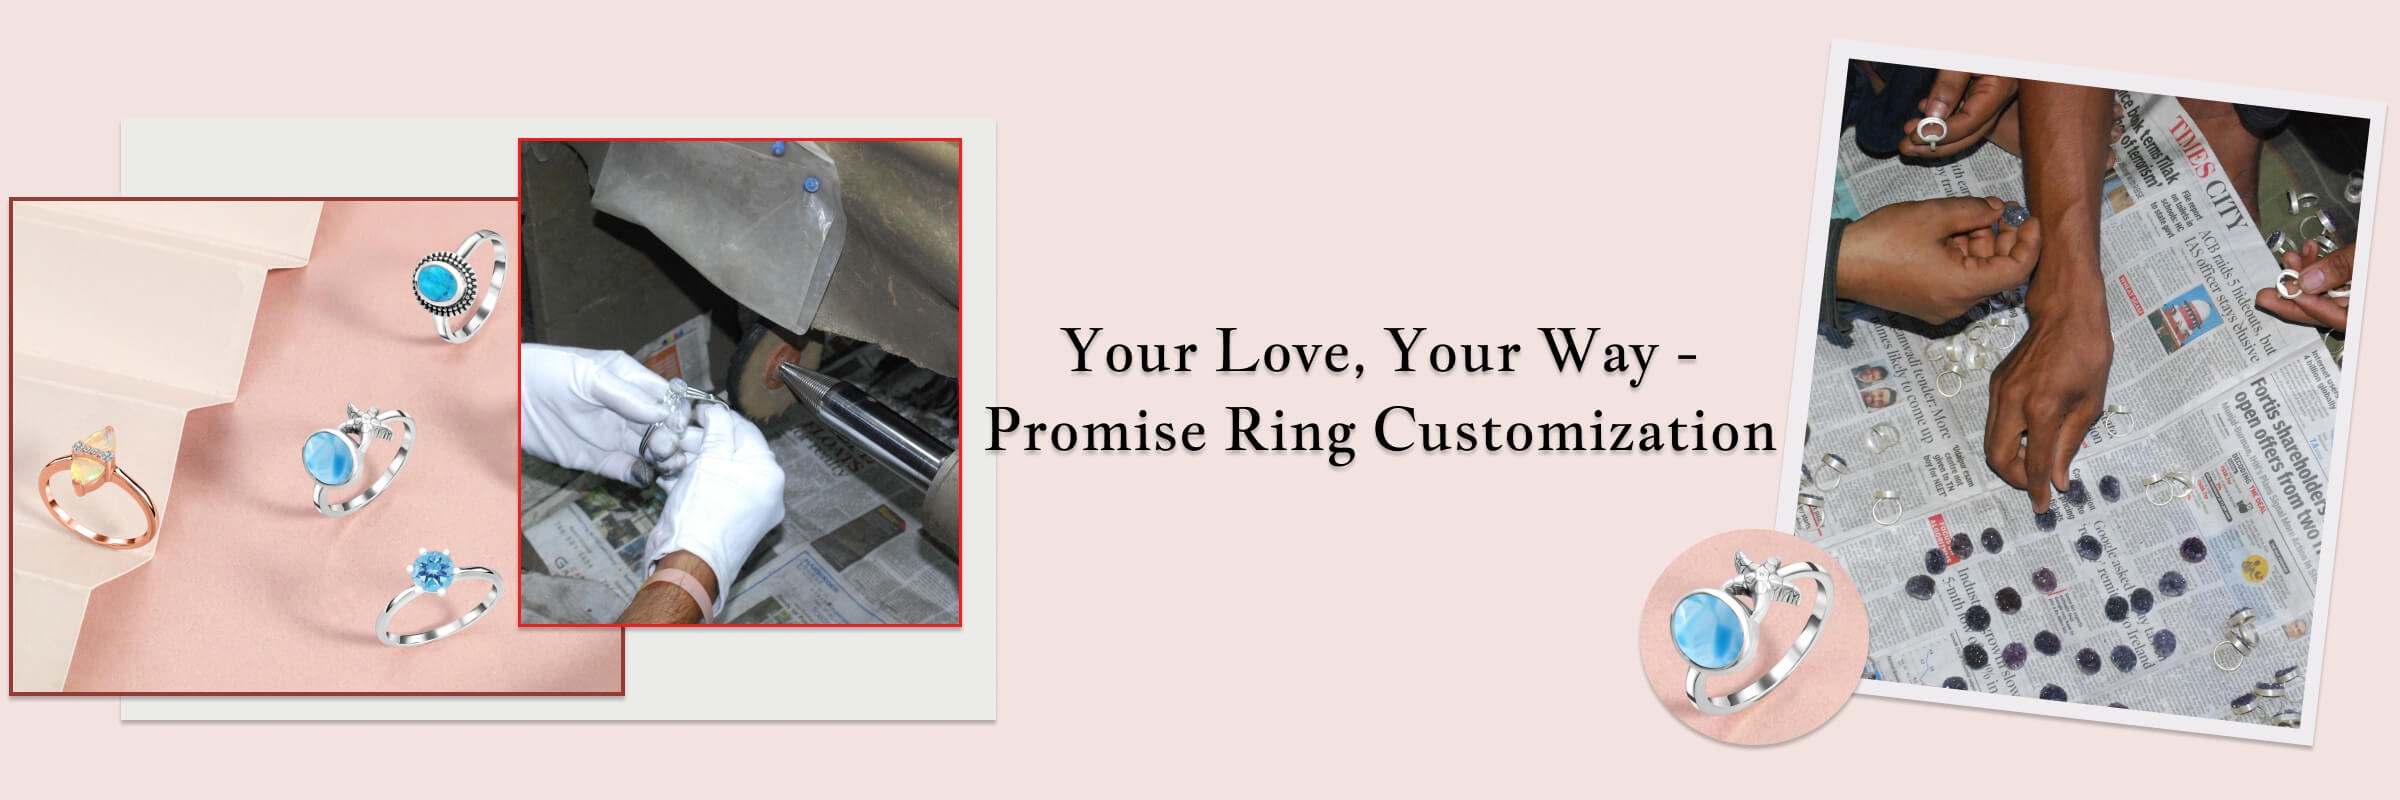 How to Customize Your Promise Ring